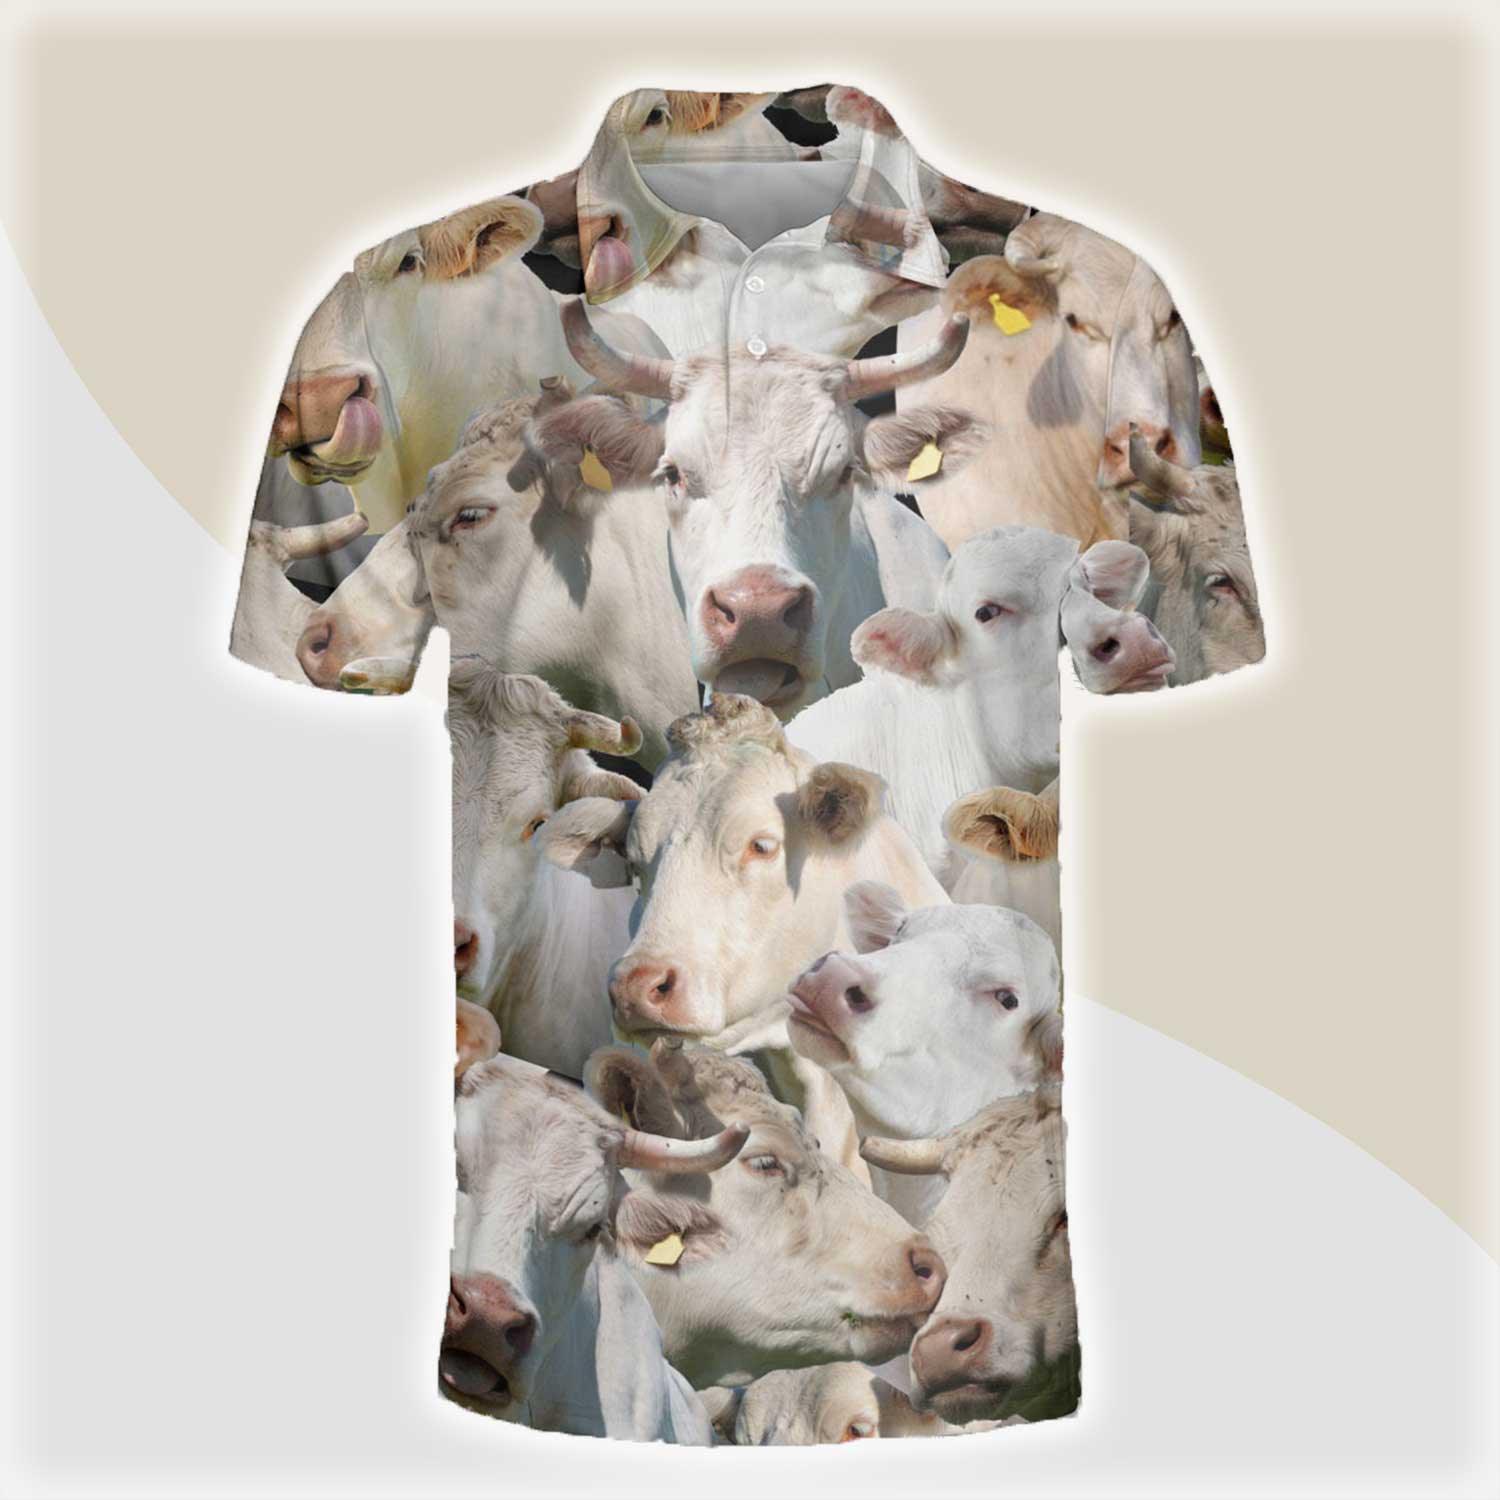 Charolais Men Polo Shirts For Summer - Charolais Herd Pattern Button Shirts For Men - Perfect Gift For Charolais Lovers, Cattle Lovers - Amzanimalsgift